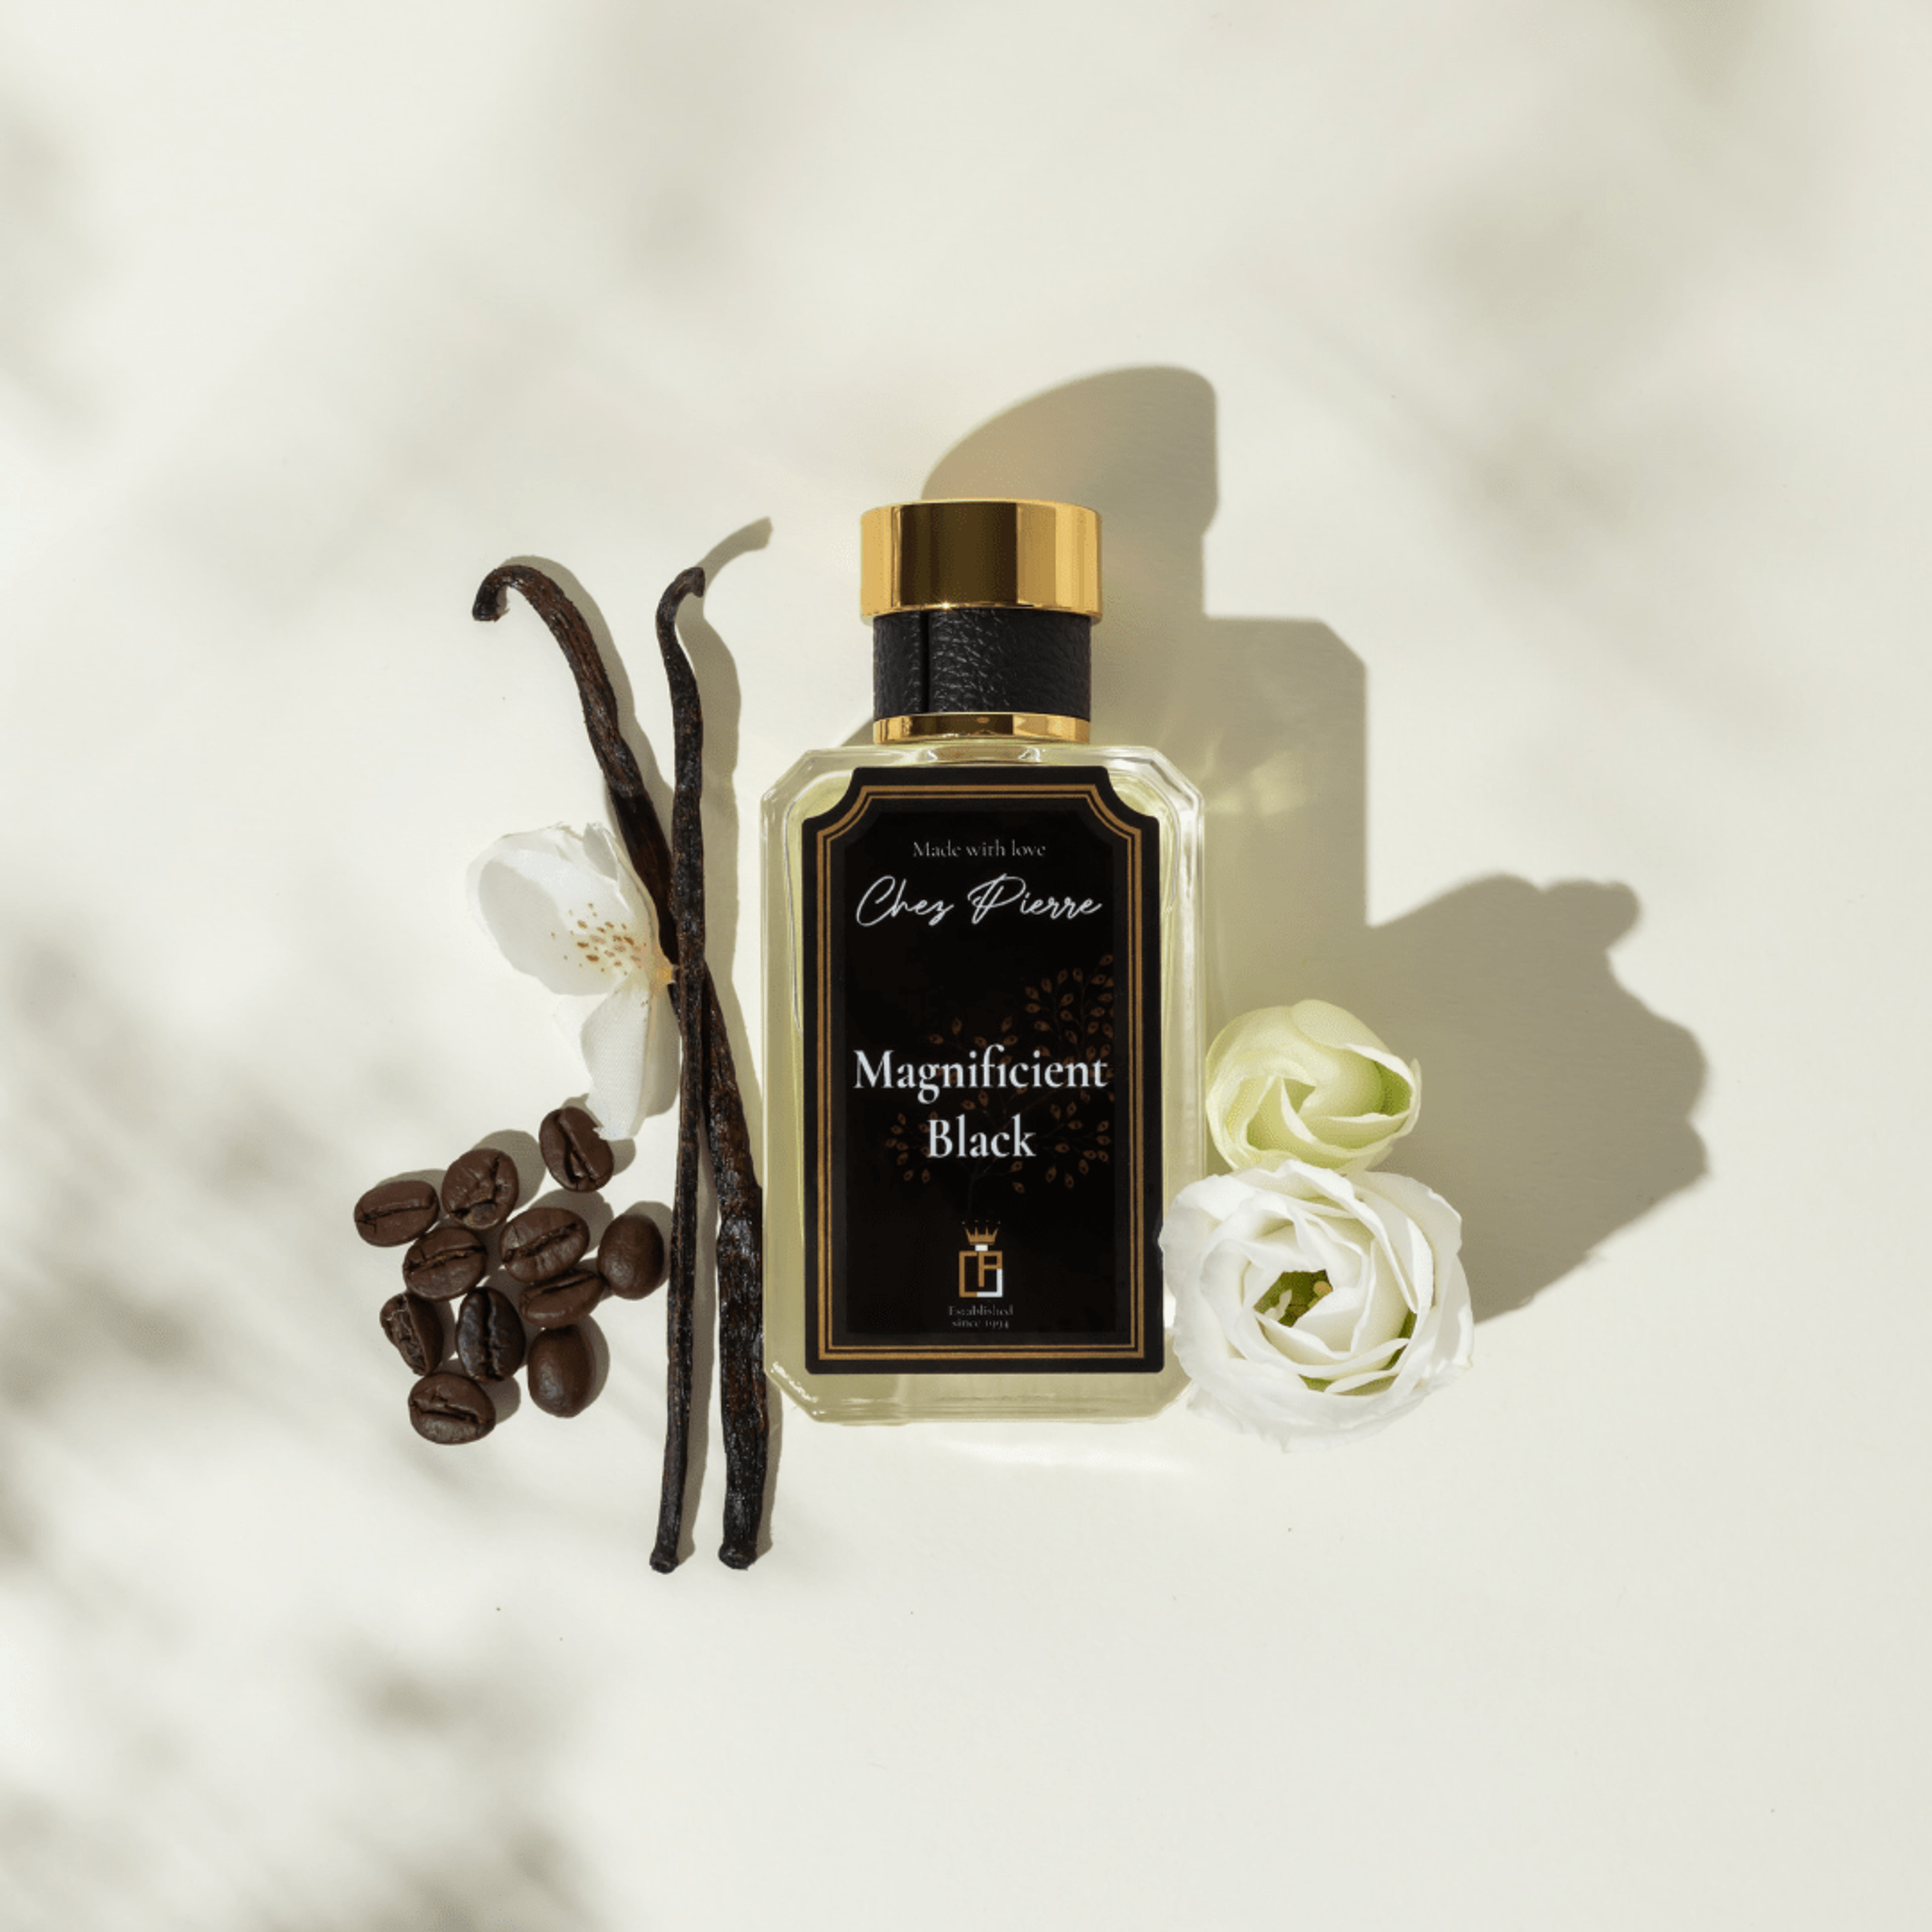 Chez Pierre's Magnificent Black Perfume Inspired By YSL Black Opium